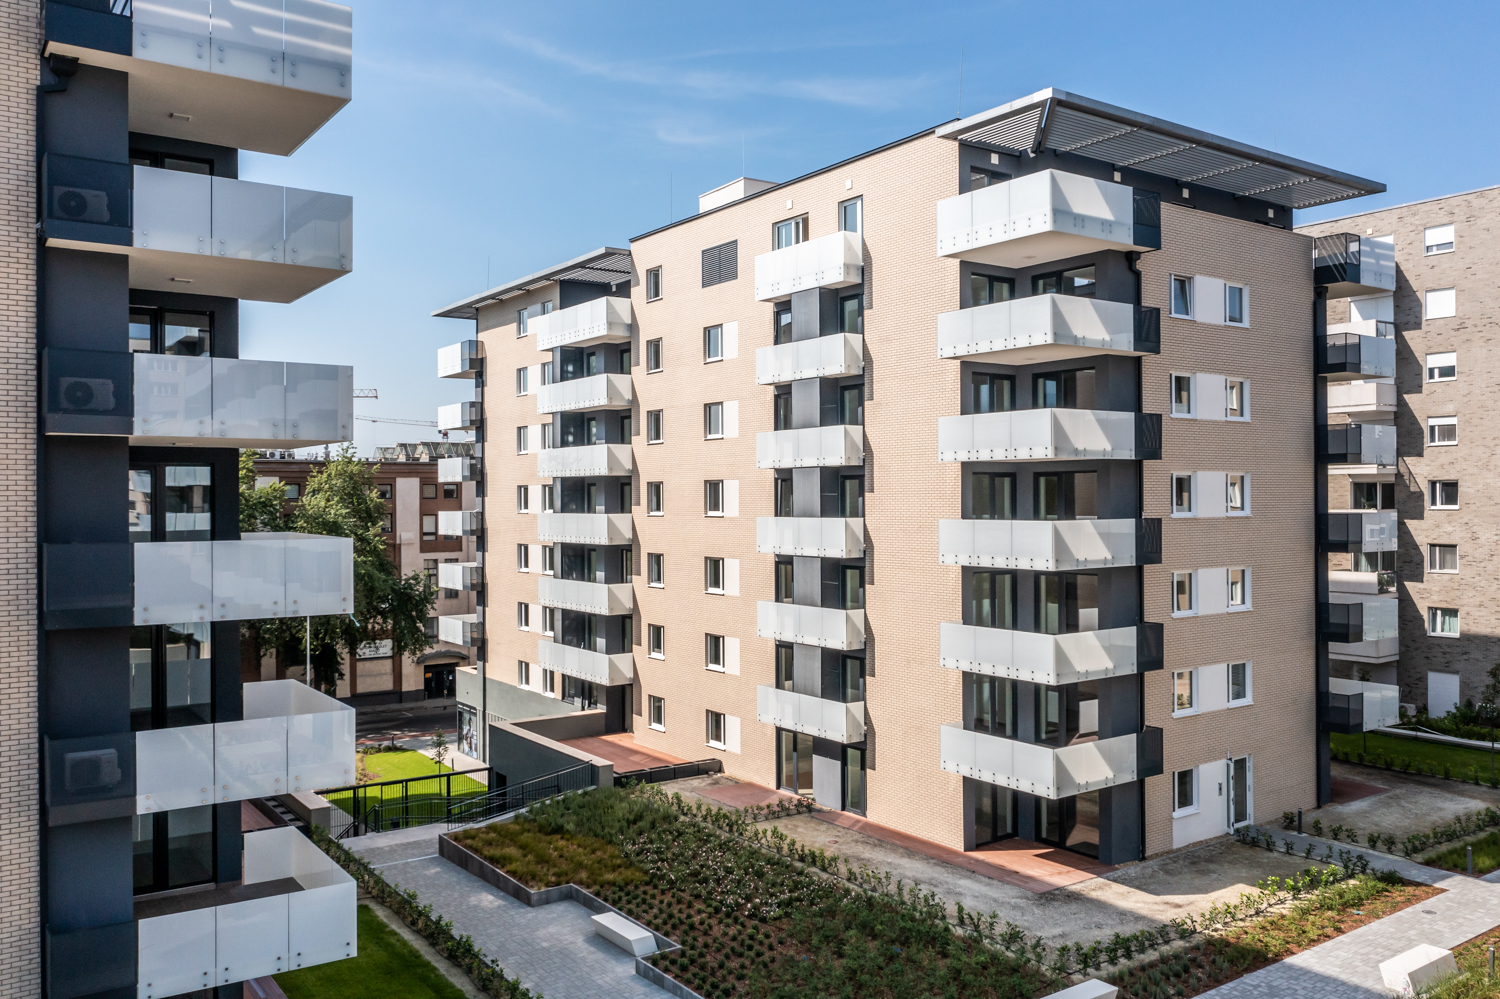 2nd Phase of Living's Kassák Project Handed Over